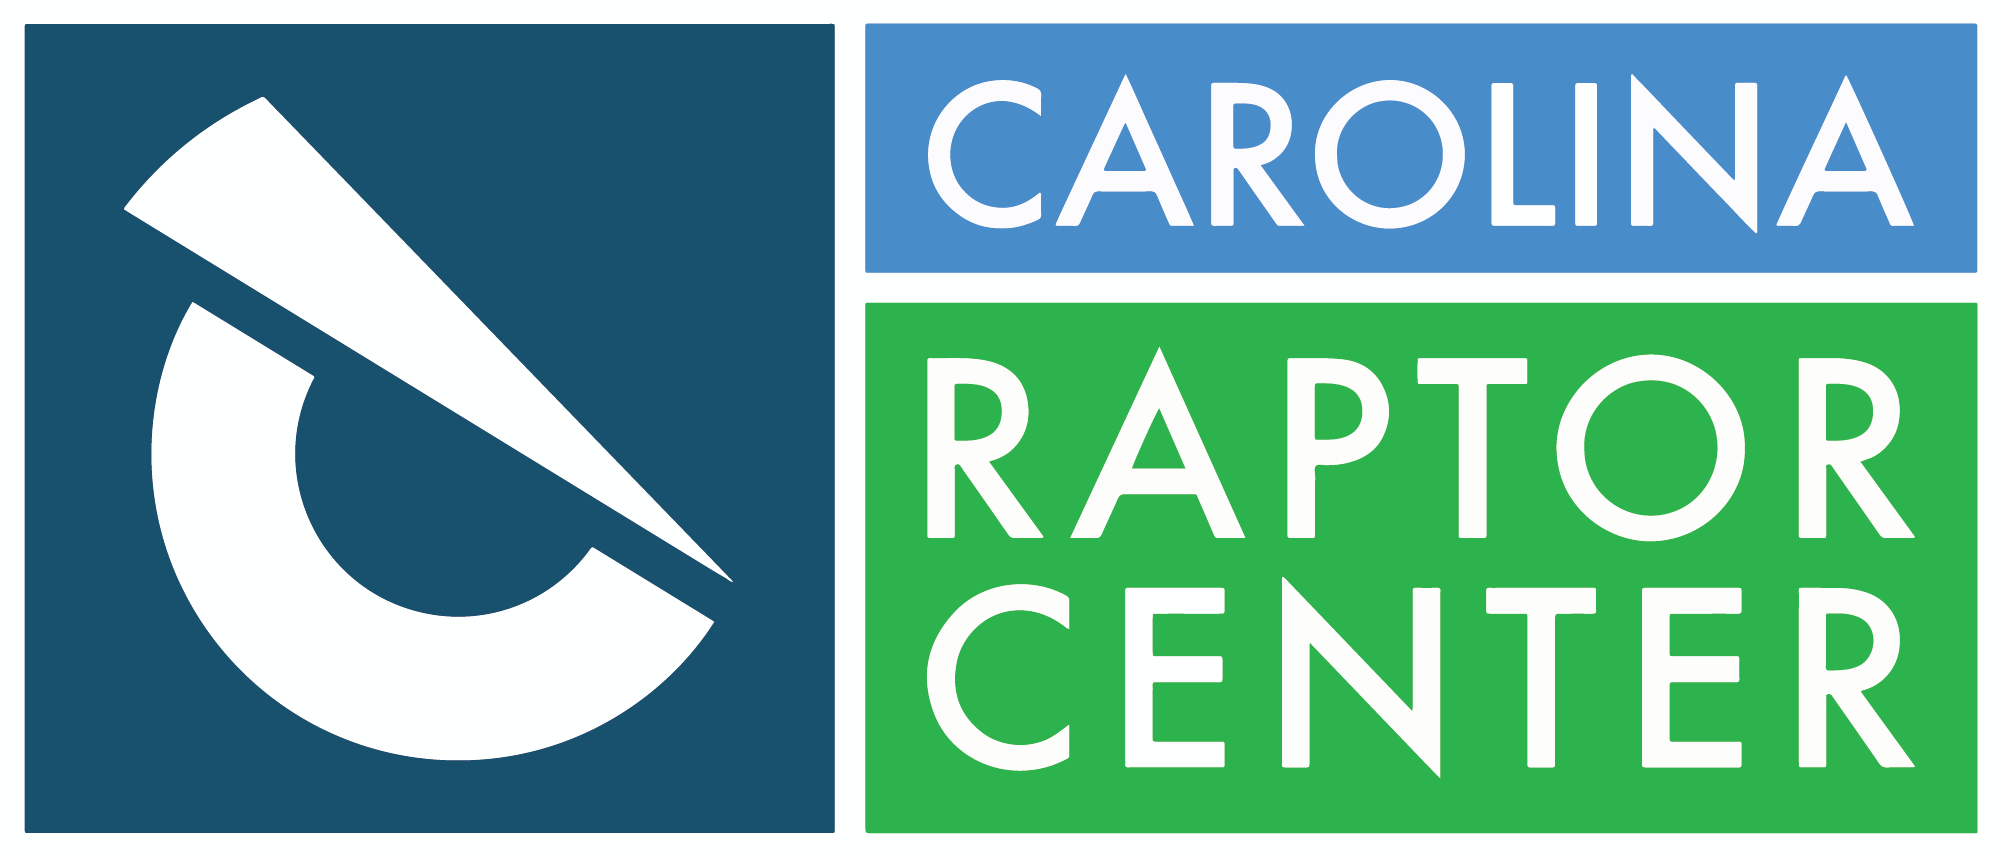 Logo with varying shades of blue and green and the name Carolina Raptor Center.